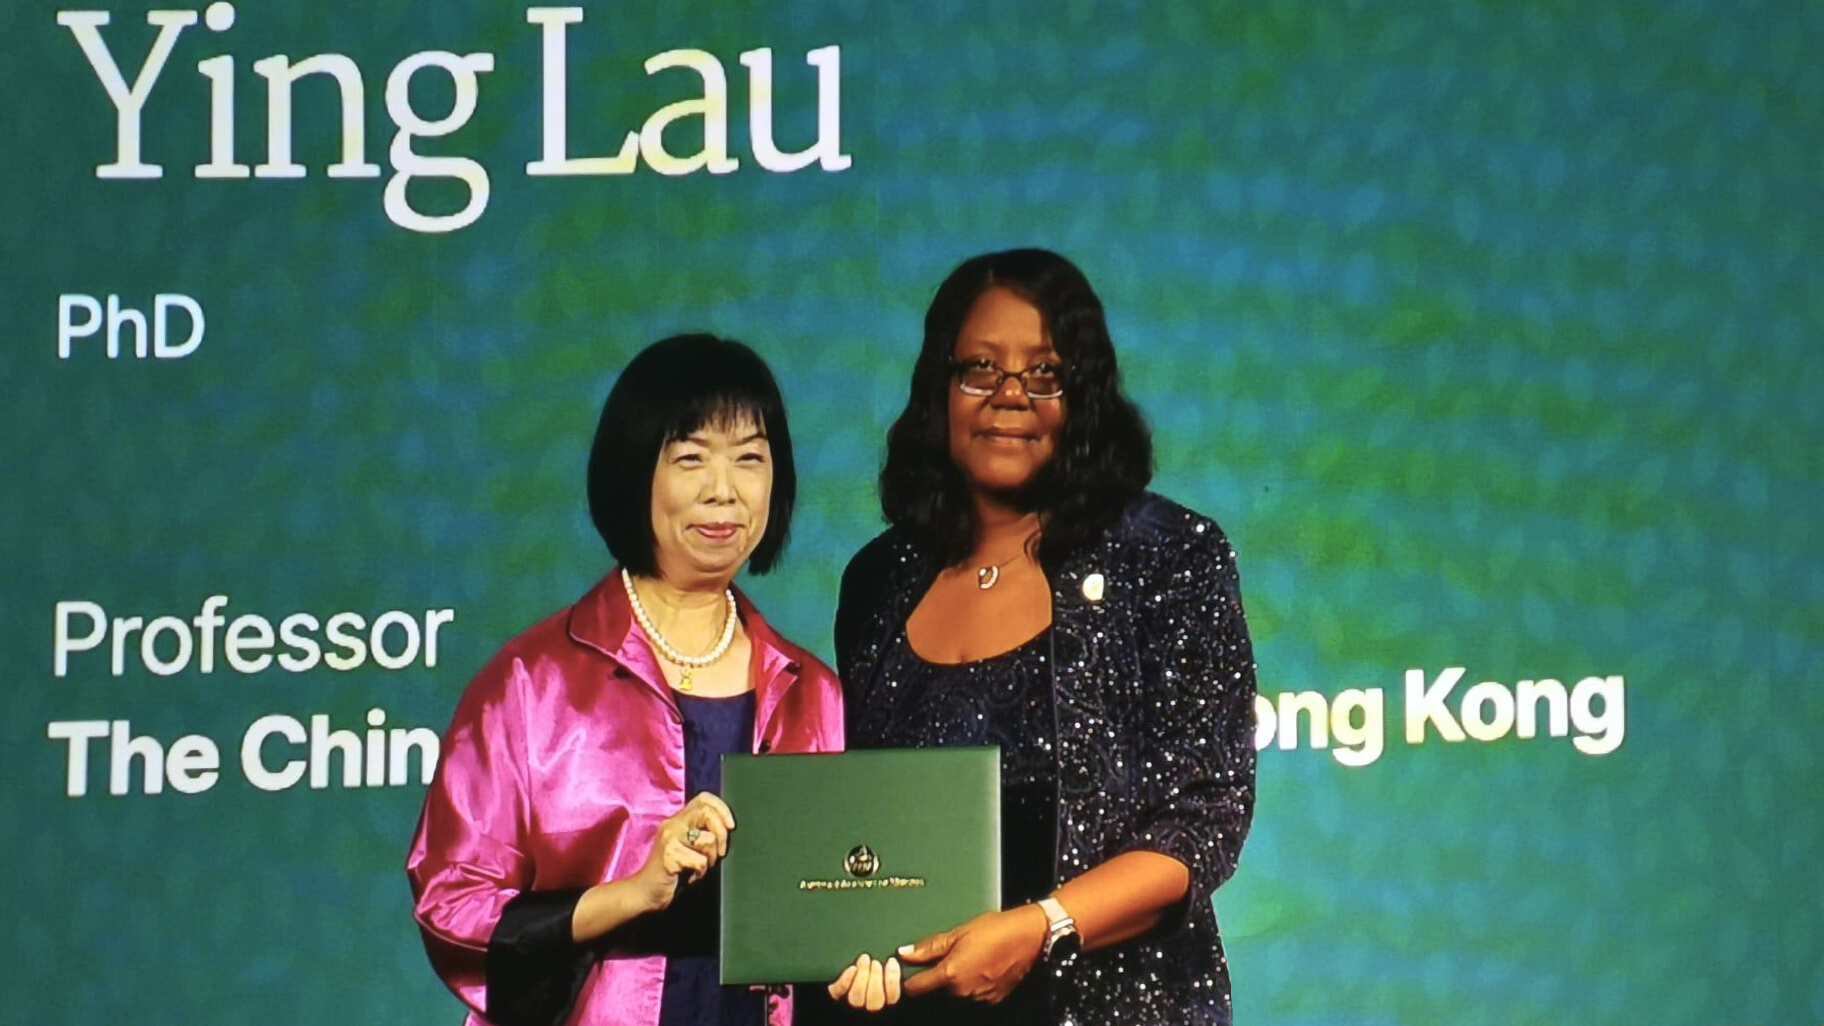 Professor Ying Lau being selected as Fellow Of The American Academy Of Nursing